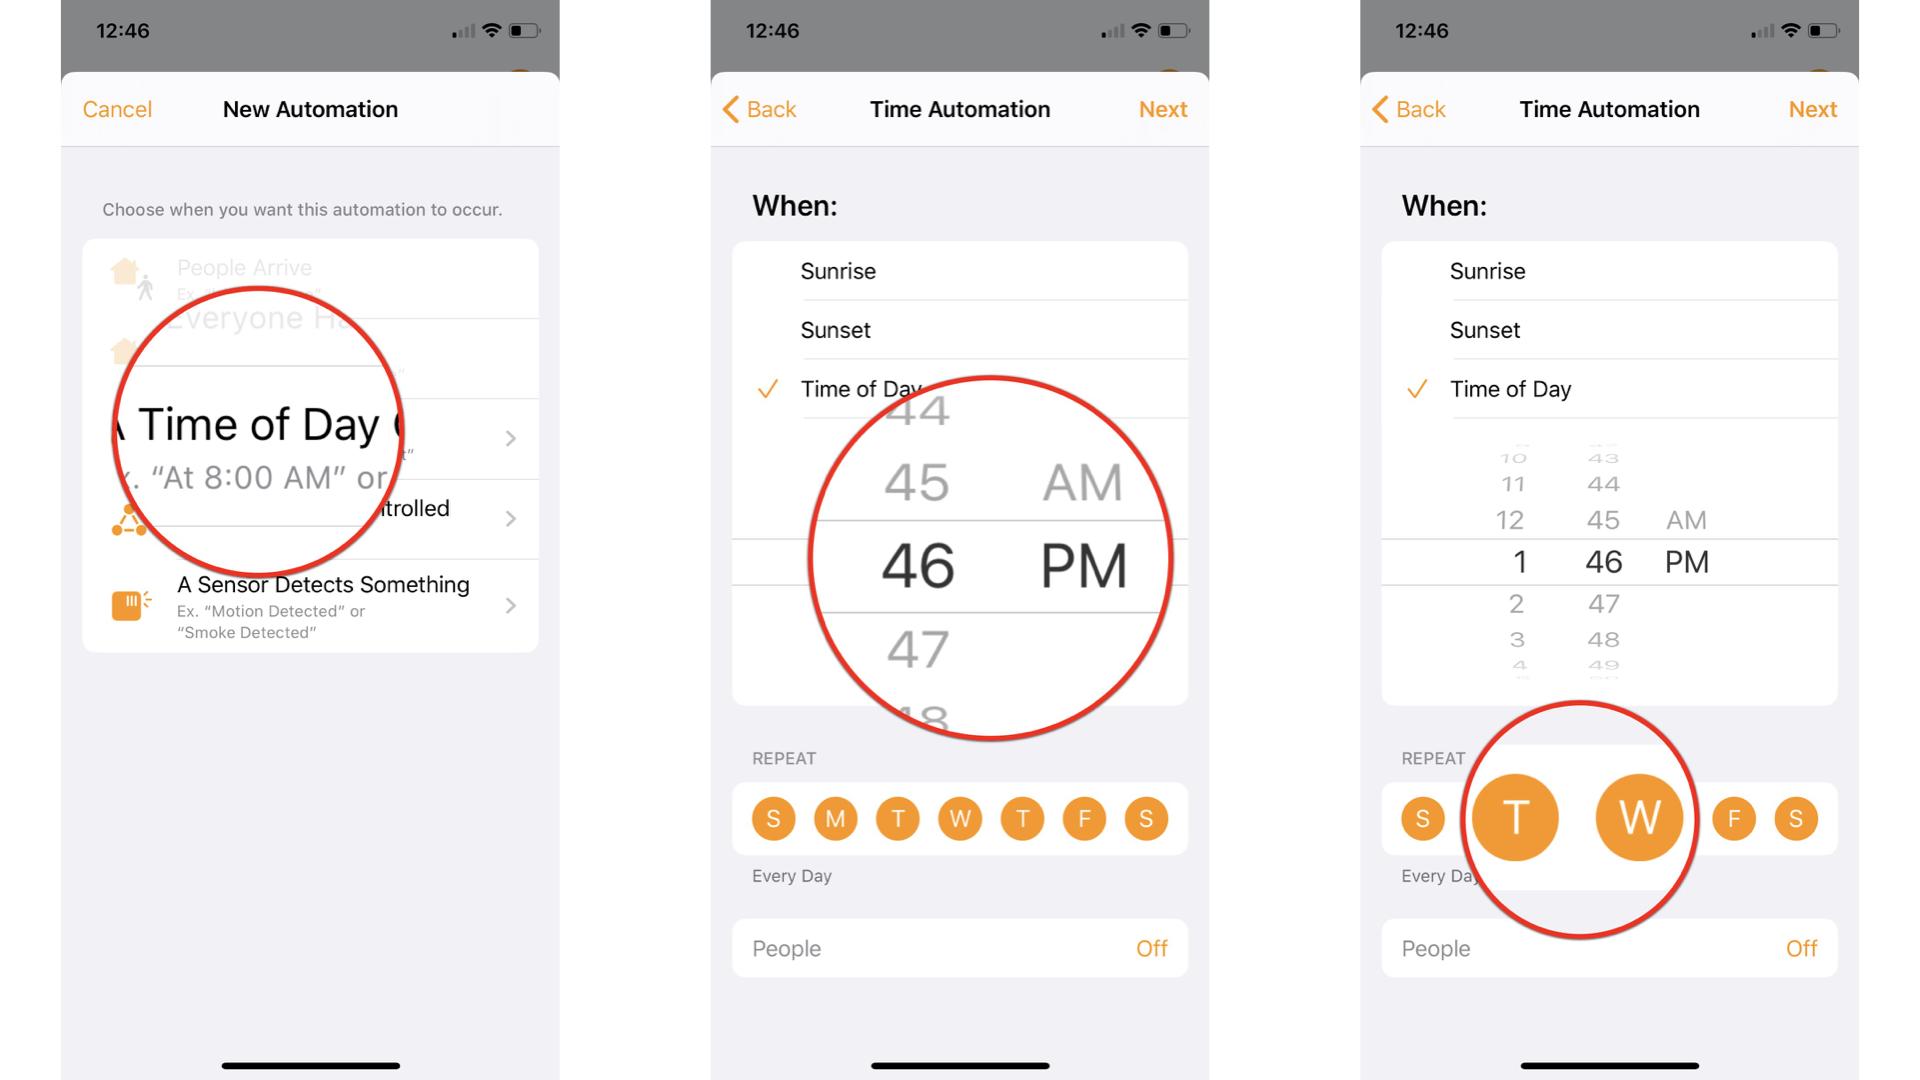 How to set up automations in the Home app on iOS 13 on the iPhone by showing steps: Choose When you want the automation to occur, Dial in the Time, Select Specific Days